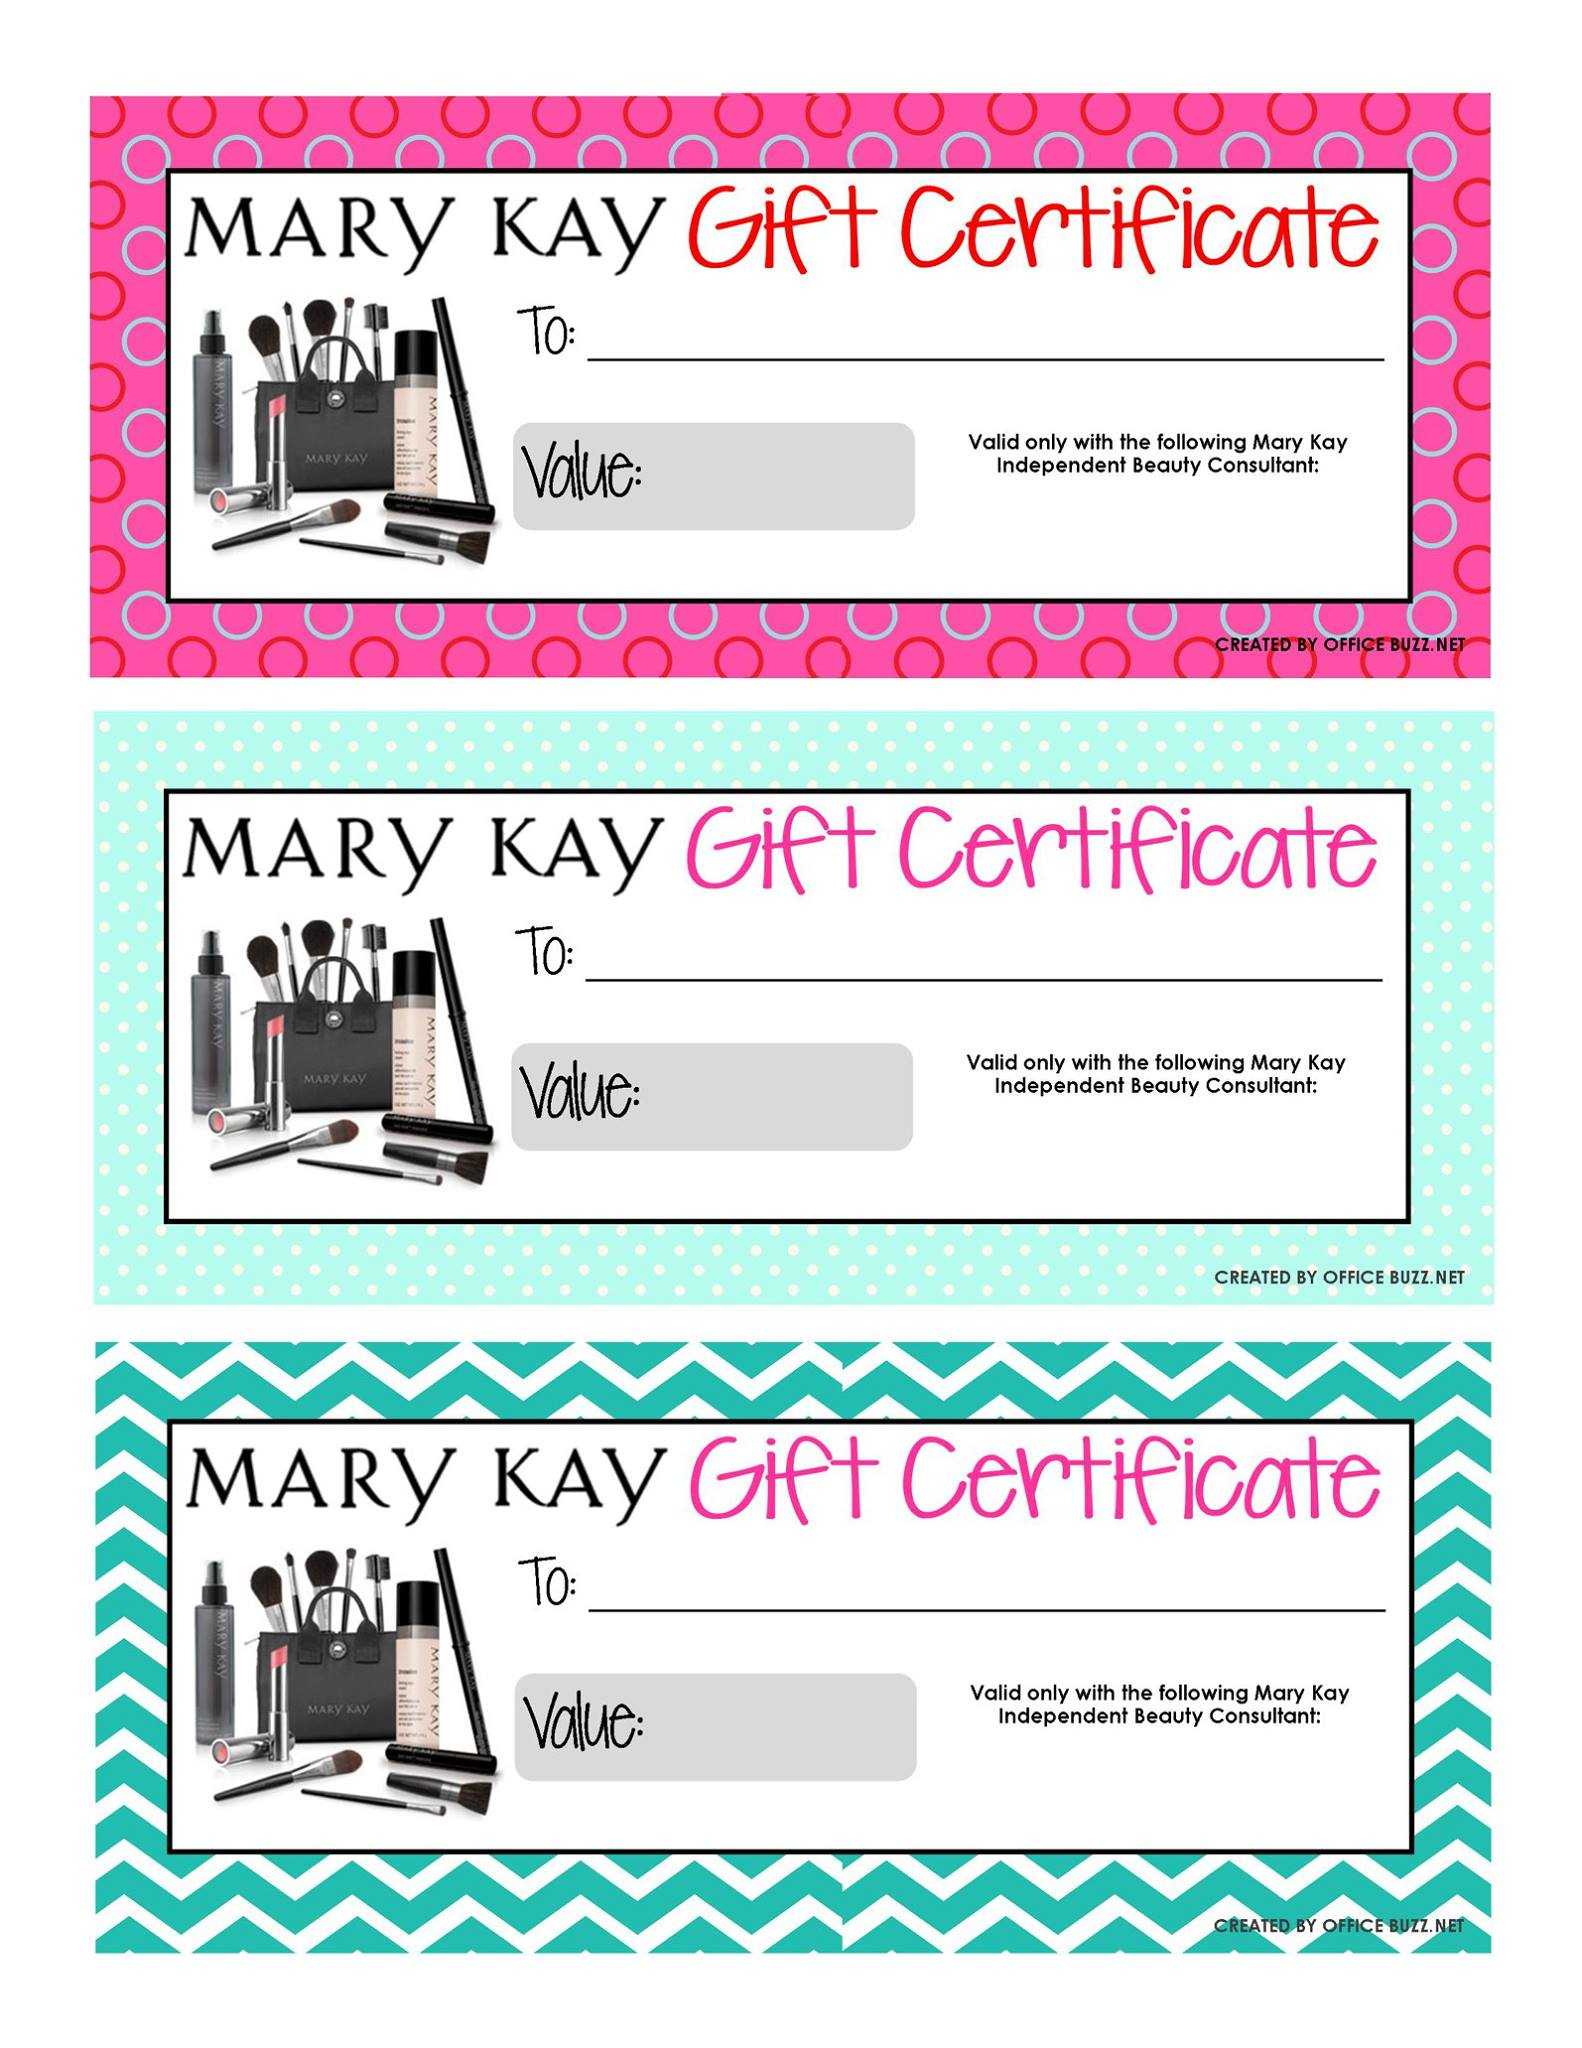 Mary Kay Gift Certificates Free Template Infoupdate Org Mary Kay My